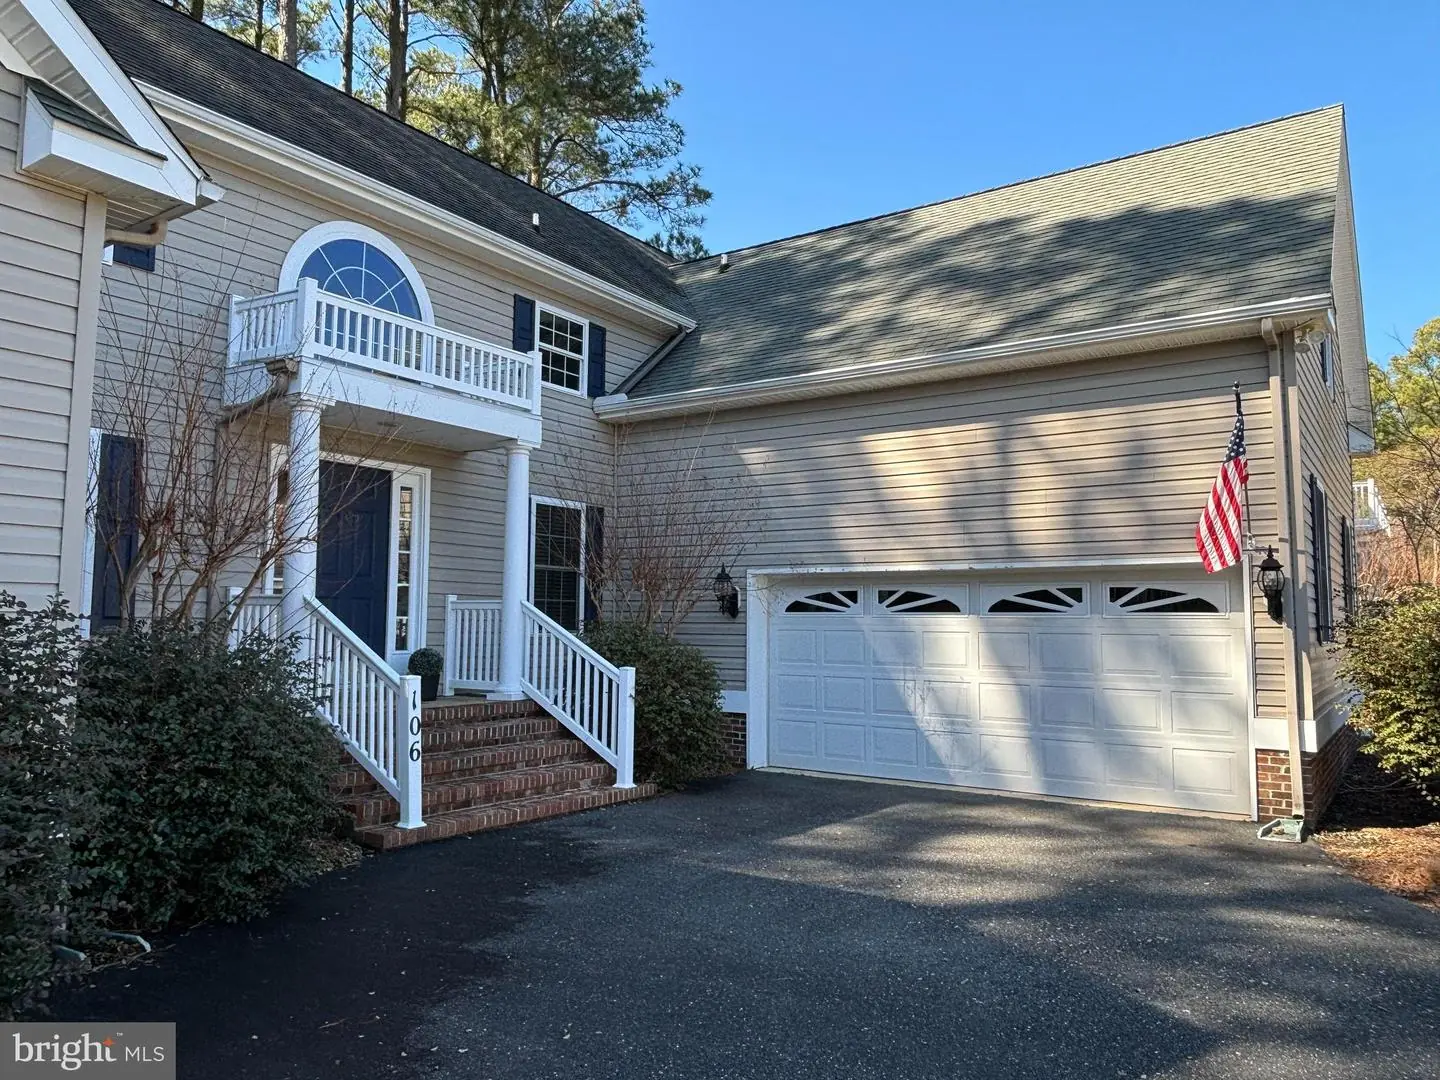 MDWO2019426-802903753116-2024-03-08-00-14-51 106 Pine Forest Dr | Berlin, MD Real Estate For Sale | MLS# Mdwo2019426  - 1st Choice Properties